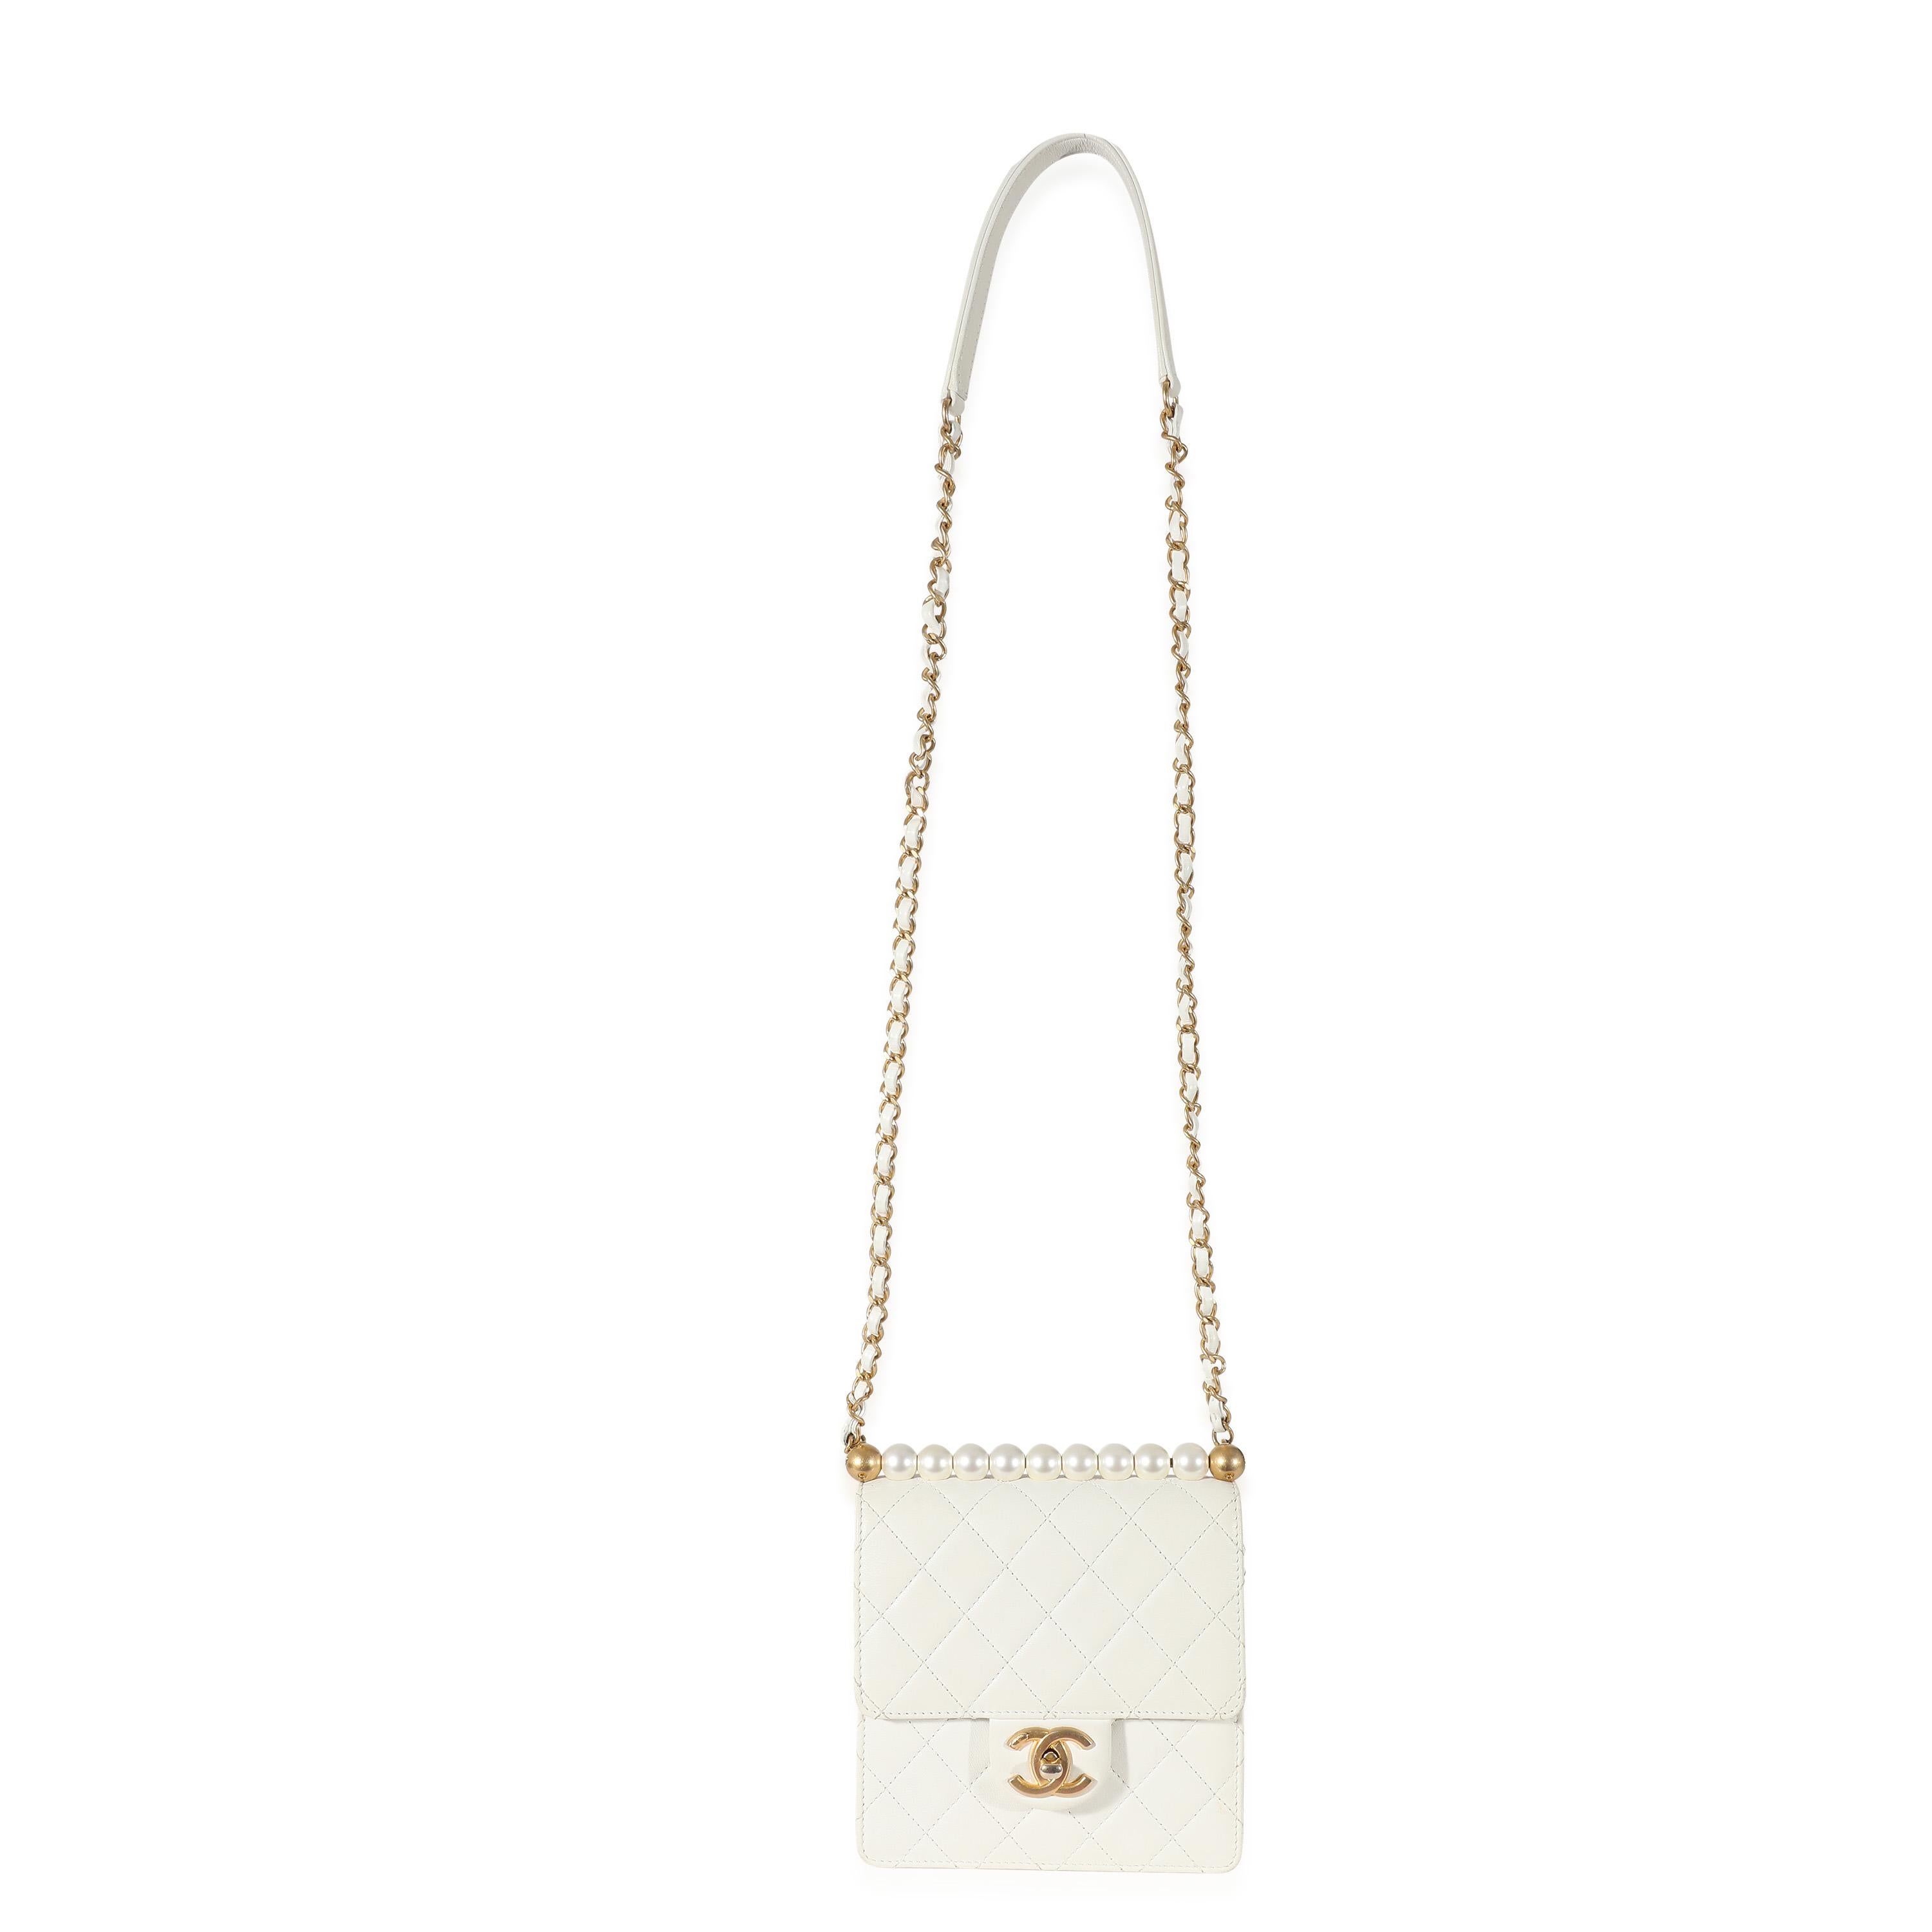 Listing Title: Chanel White Quilted Goatskin Vertical Chic Pearls Flap Bag
SKU: 135044
Condition: Pre-owned 
Condition Description: A timeless classic that never goes out of style, the flap bag from Chanel dates back to 1955 and has seen a number of